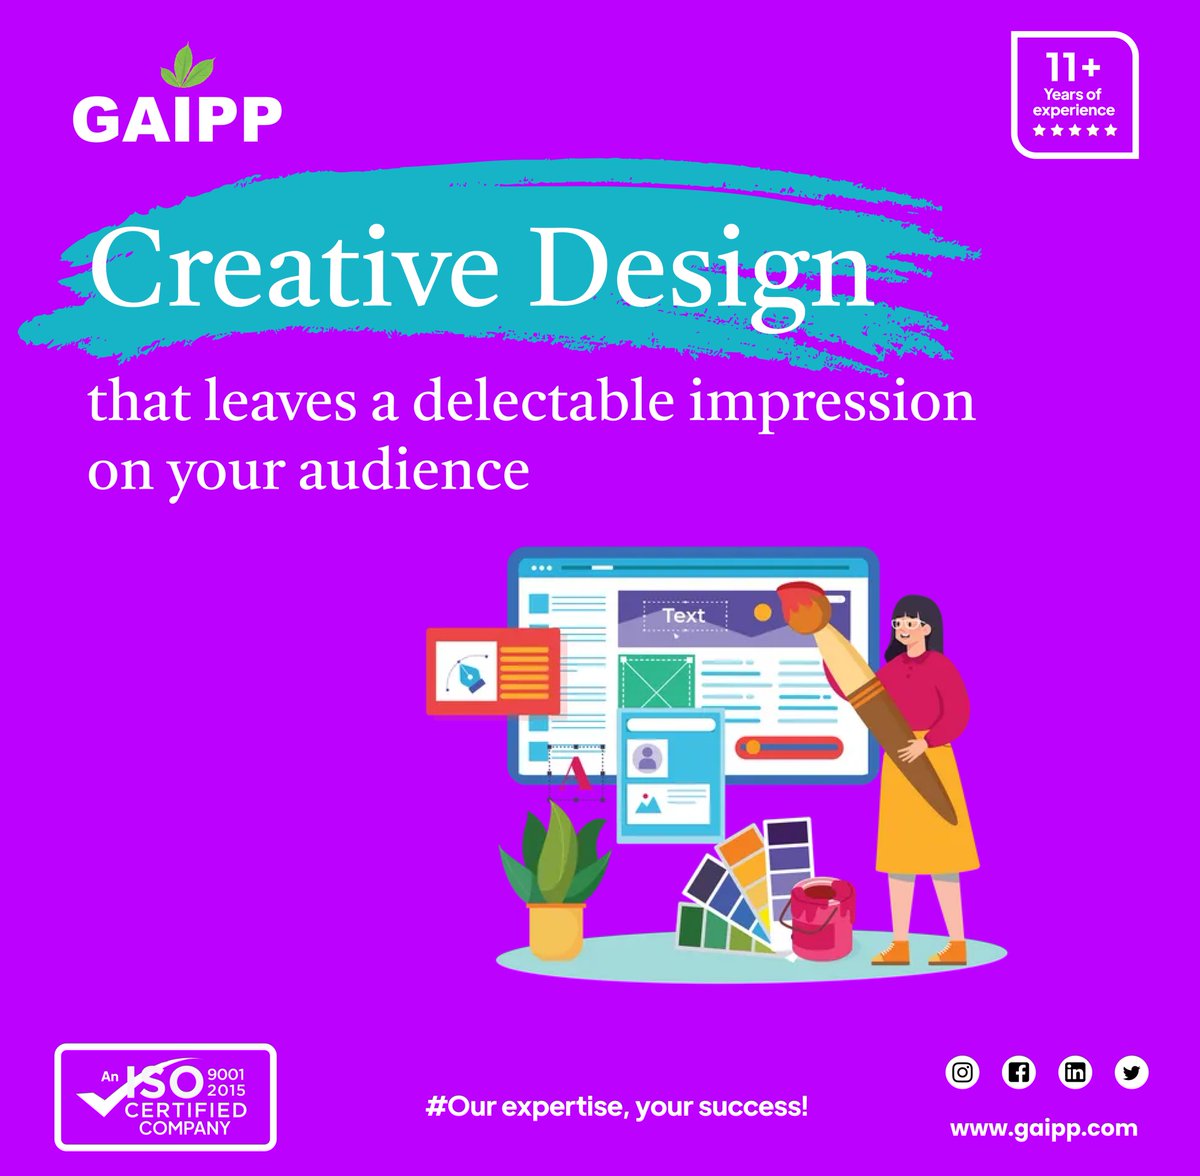 Craft Visual Designs That Leave a Delectable and Lasting Impression on Your Audience

#CreativeDesign #VisualStorytelling #Gaipp #ArtisticExcellence #DesignMatters #GraphicDesign #DesignMagic #BrandAesthetics #UserExperience